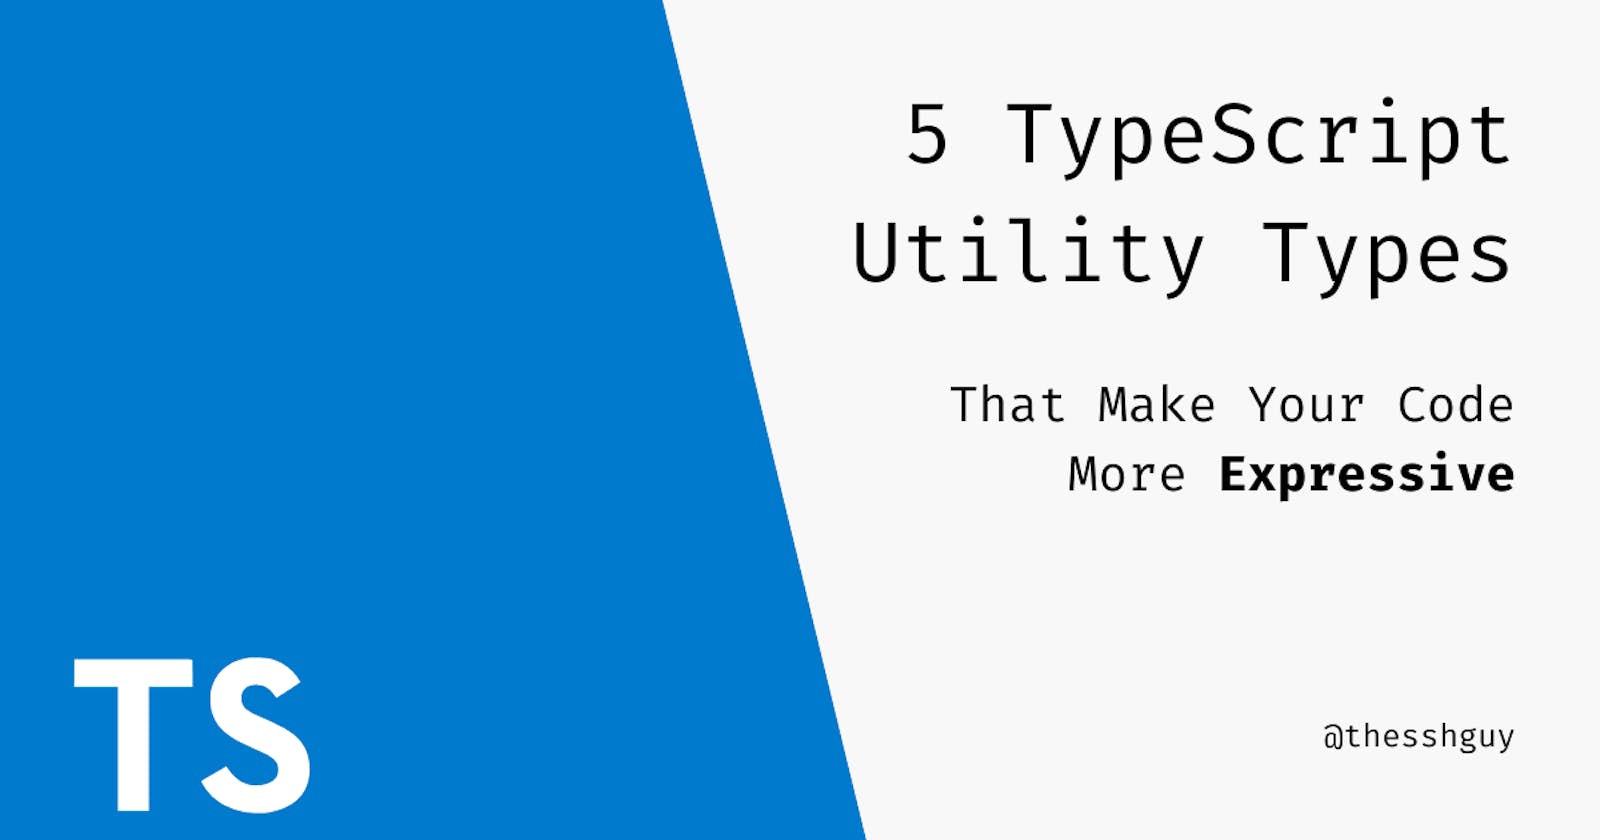 5 TypeScript Utility Types That Make Your Code More Expressive